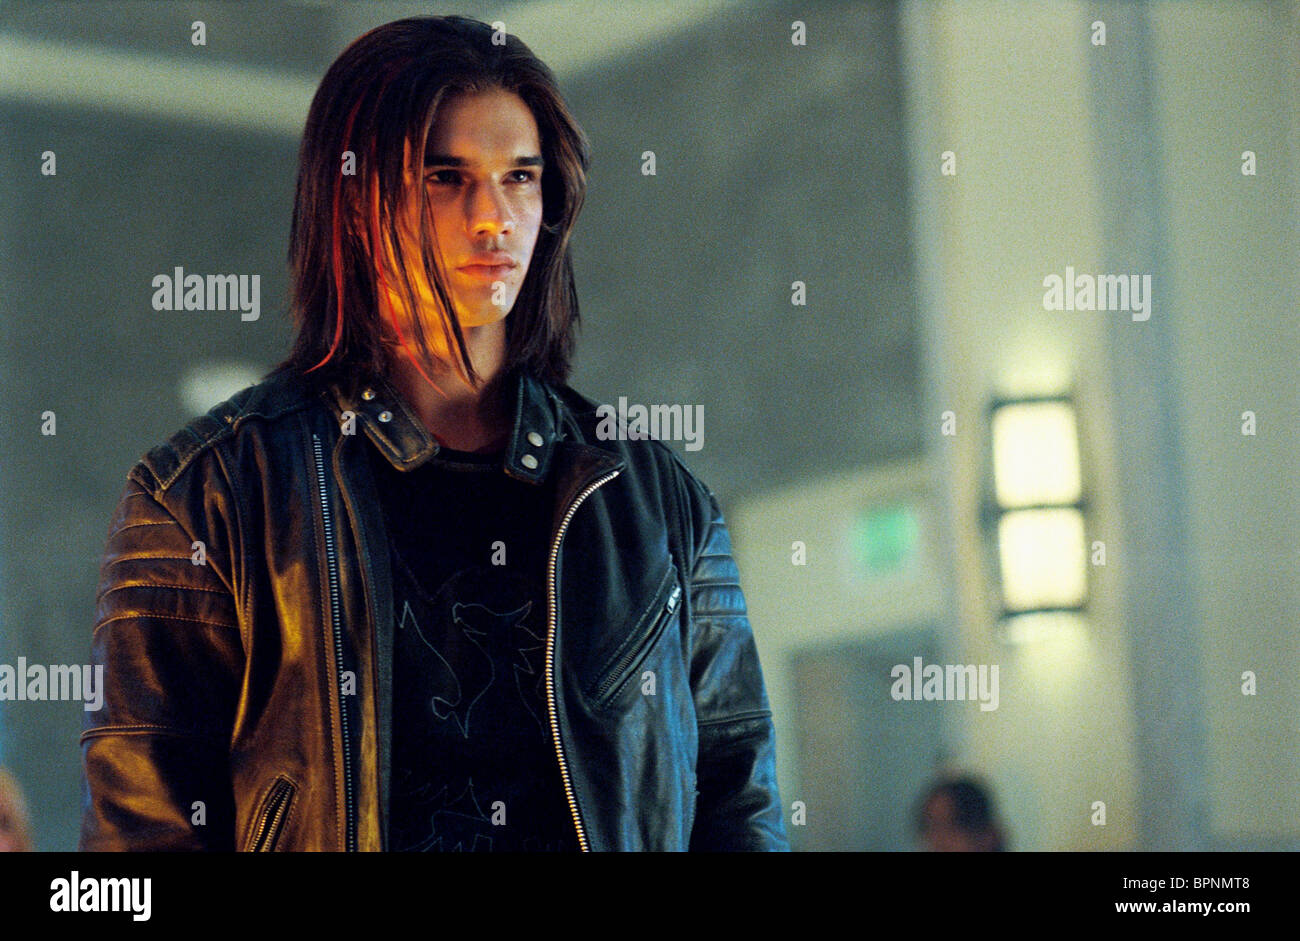 Steven Strait High Resolution Stock Photography and Images - Alamy